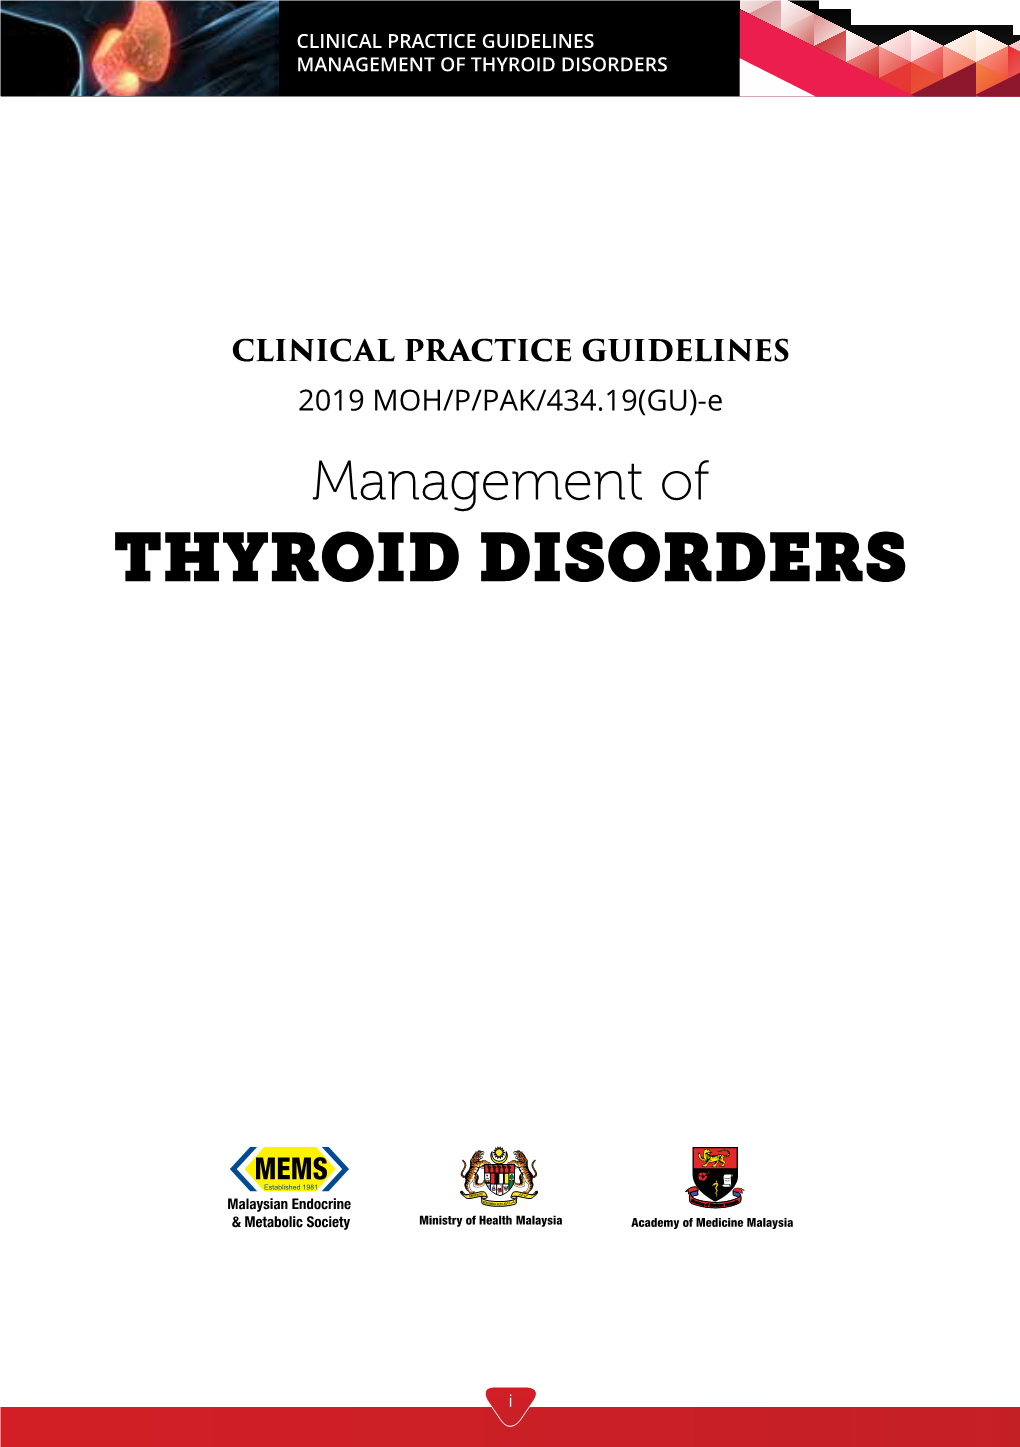 CPG Management of Thyroid Disorders